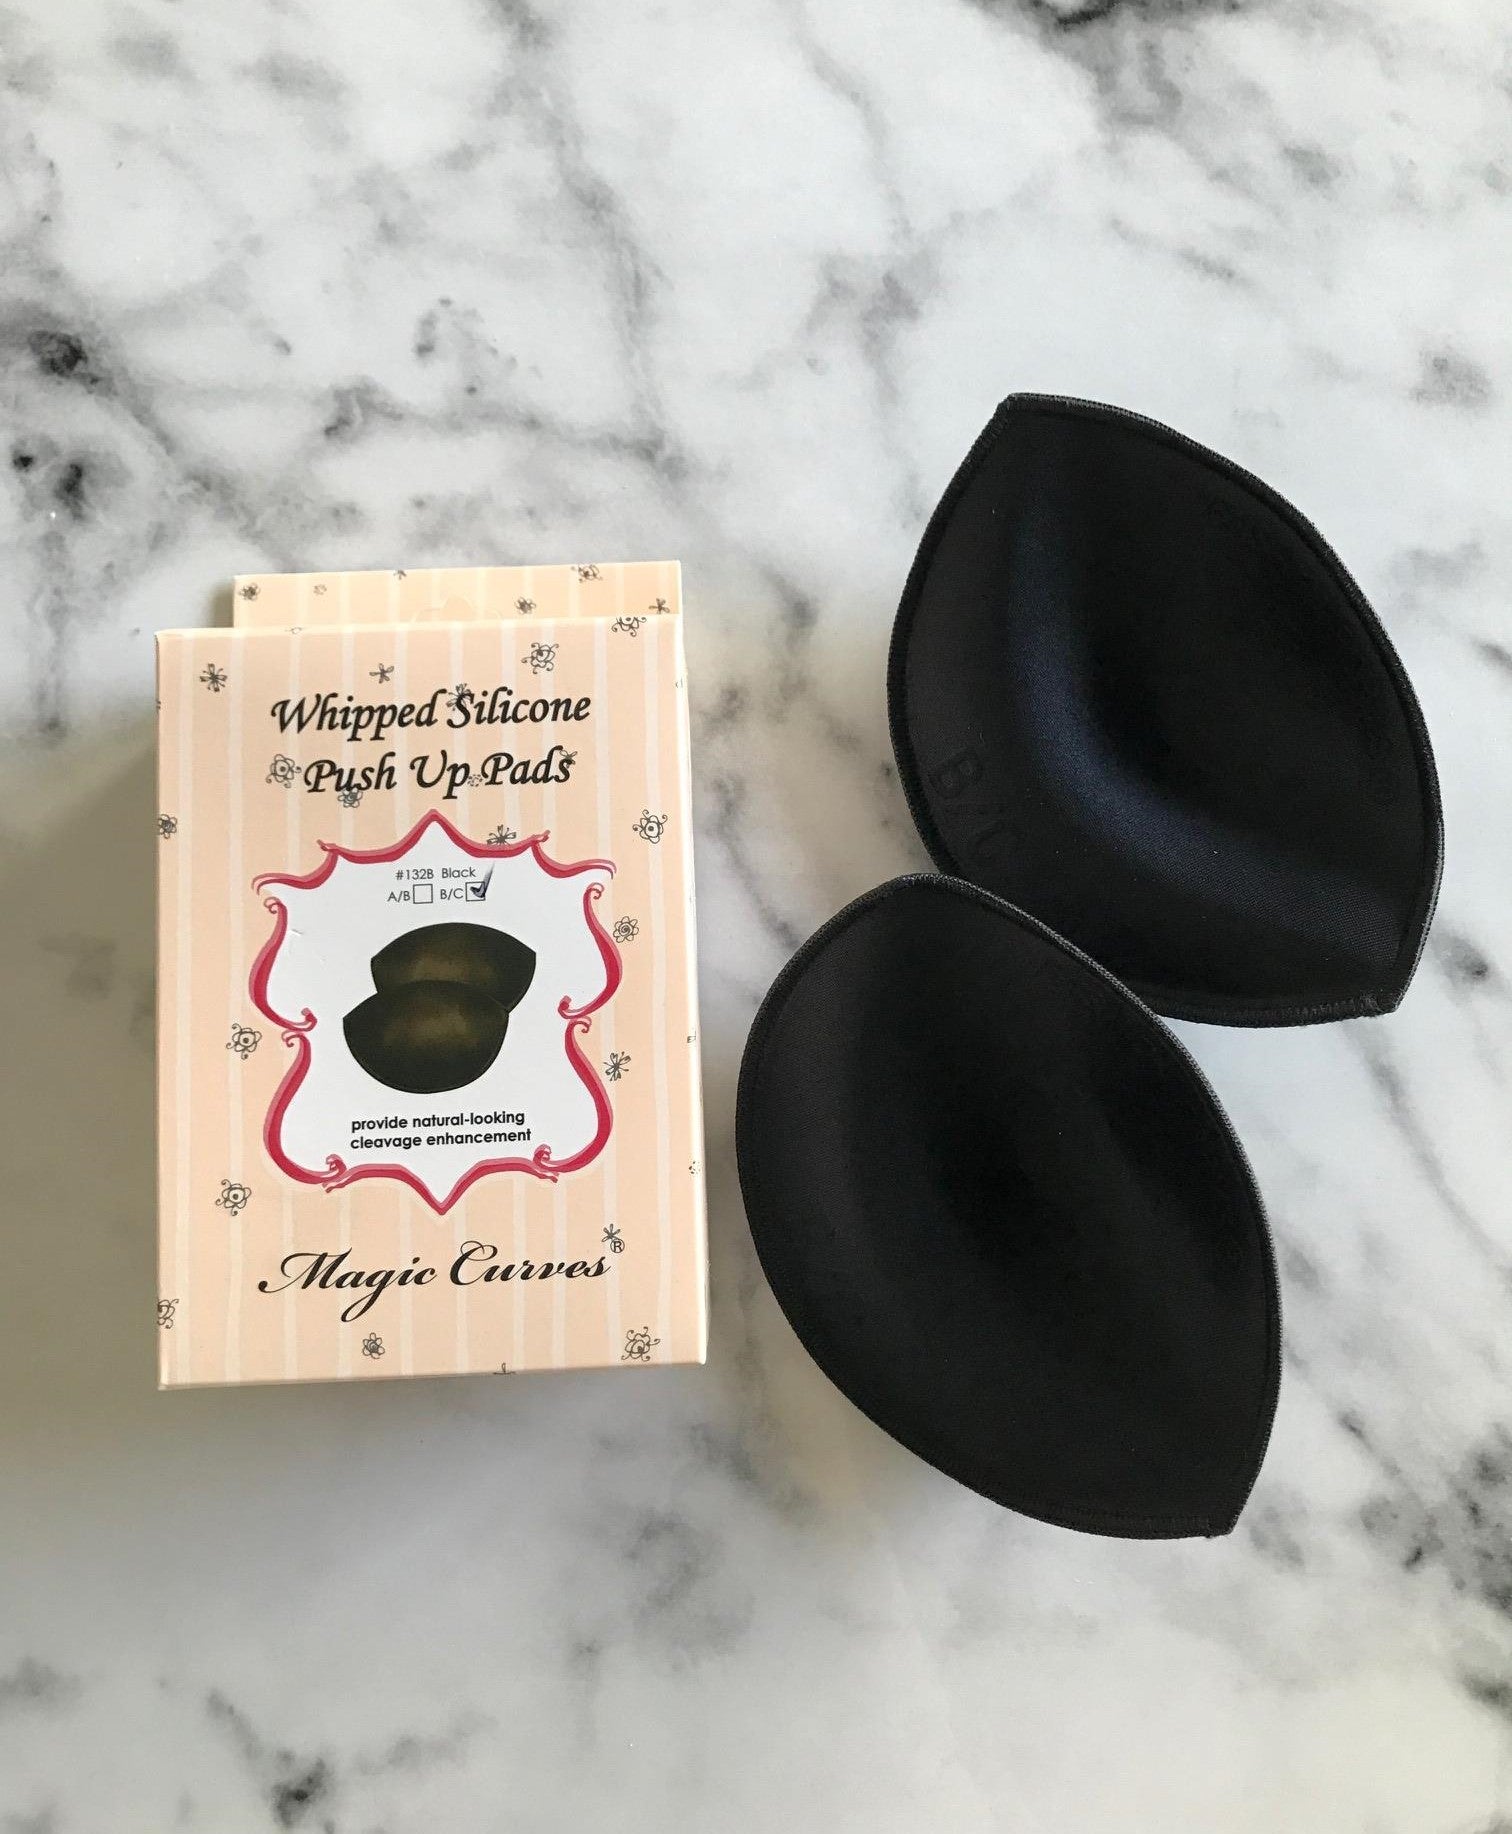 MAGIC CURVES WHIPPED SILICONE PUSH UP PADS (SIZES A/B, B/C